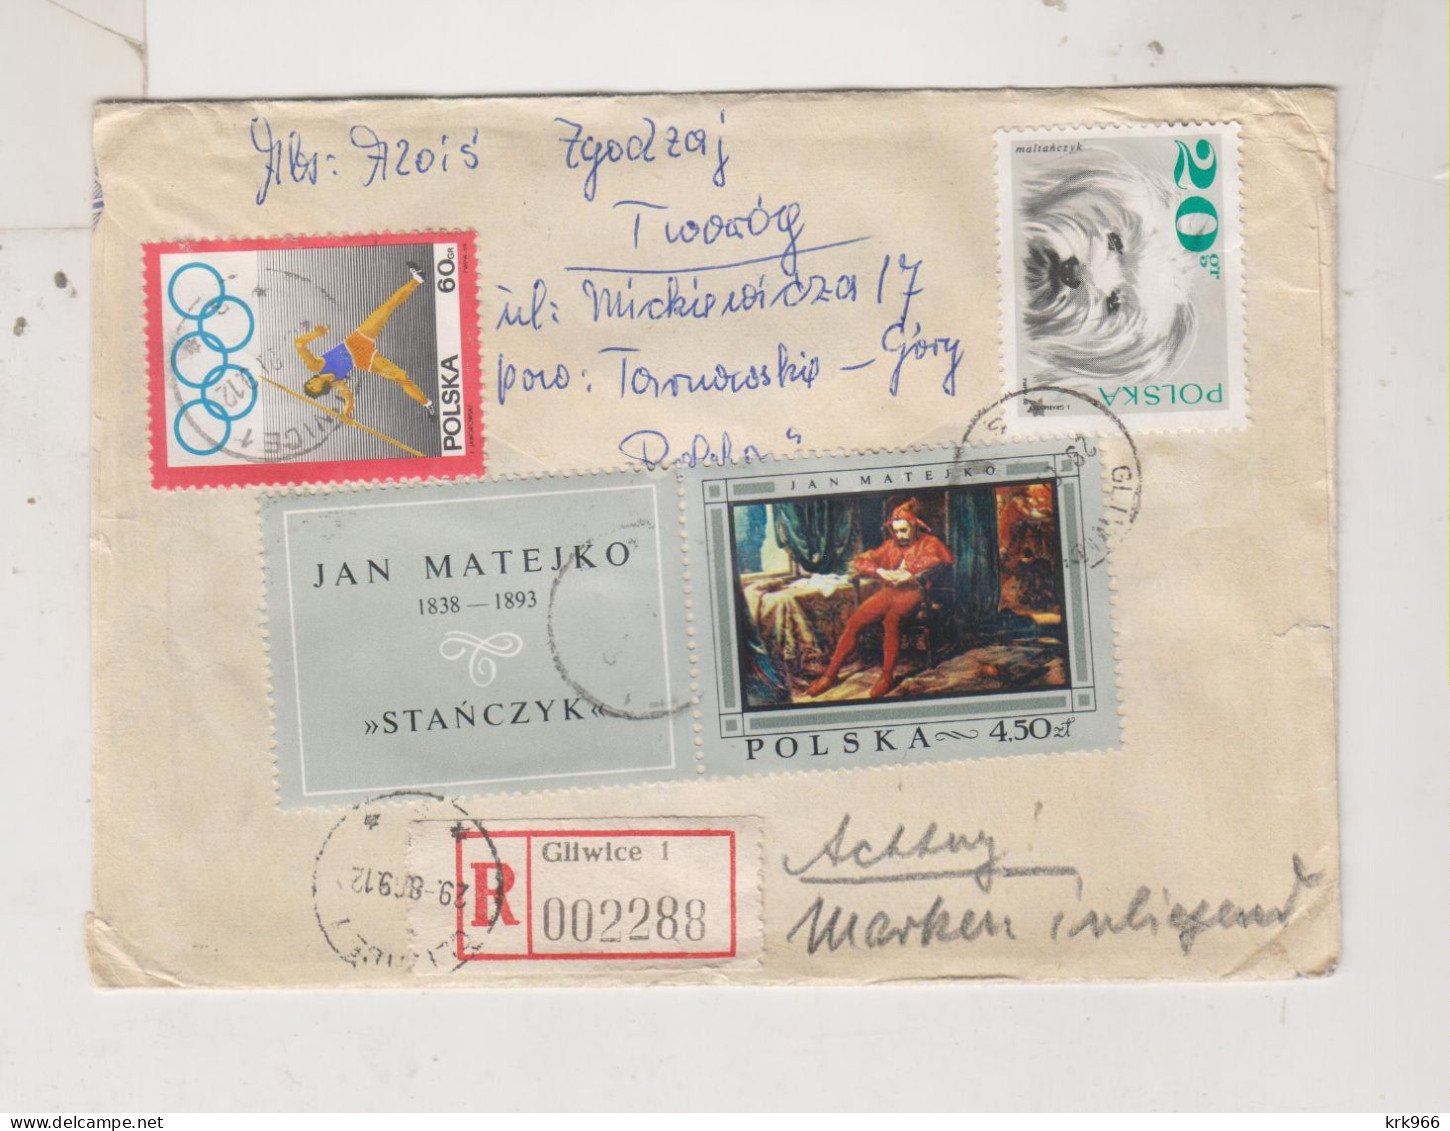 POLAND 1969  GLIWICE Registered Cover To Germany - Storia Postale